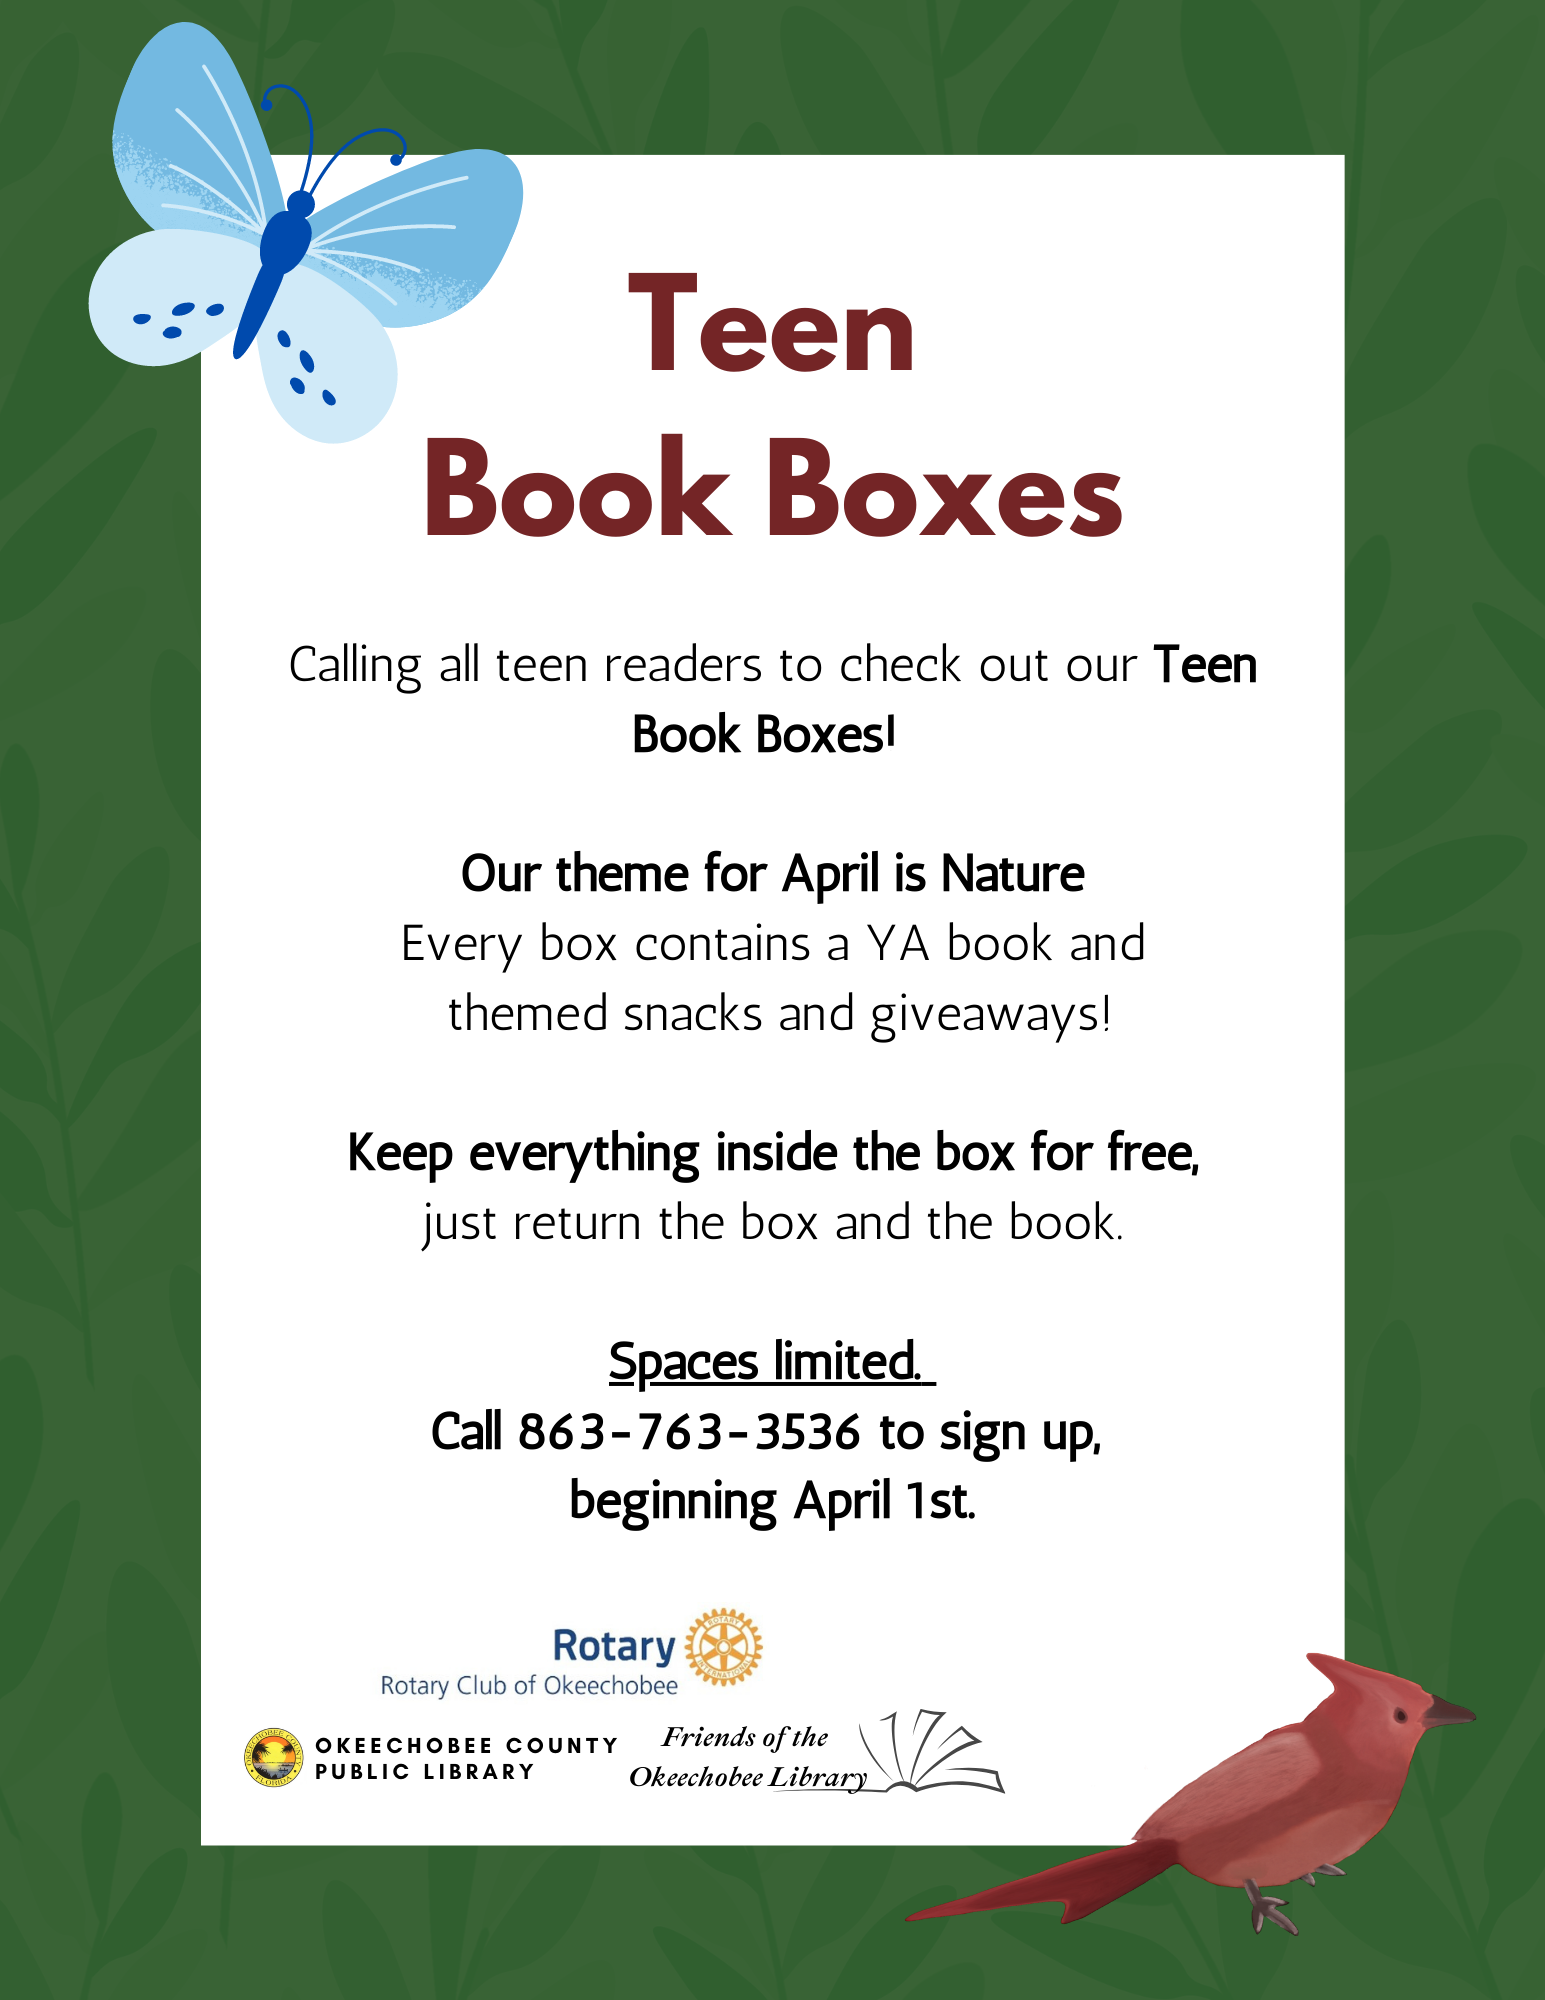 April Teen Book Boxes! Open to all teens, get free prizes and snacks just for checking out a book!